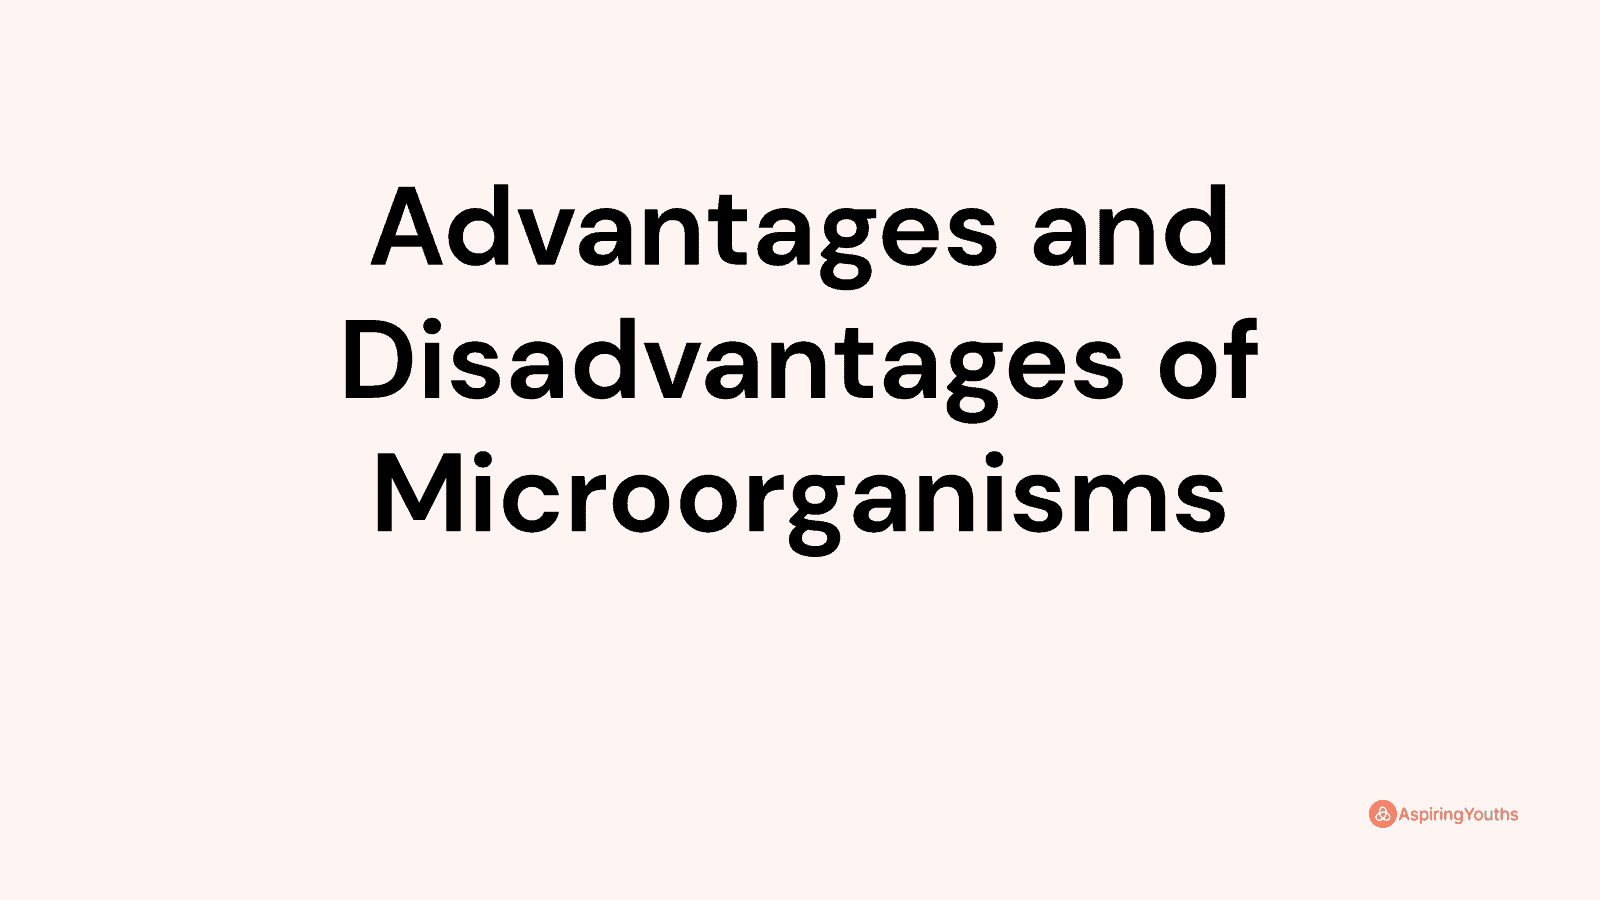 Advantages and disadvantages of Microorganisms